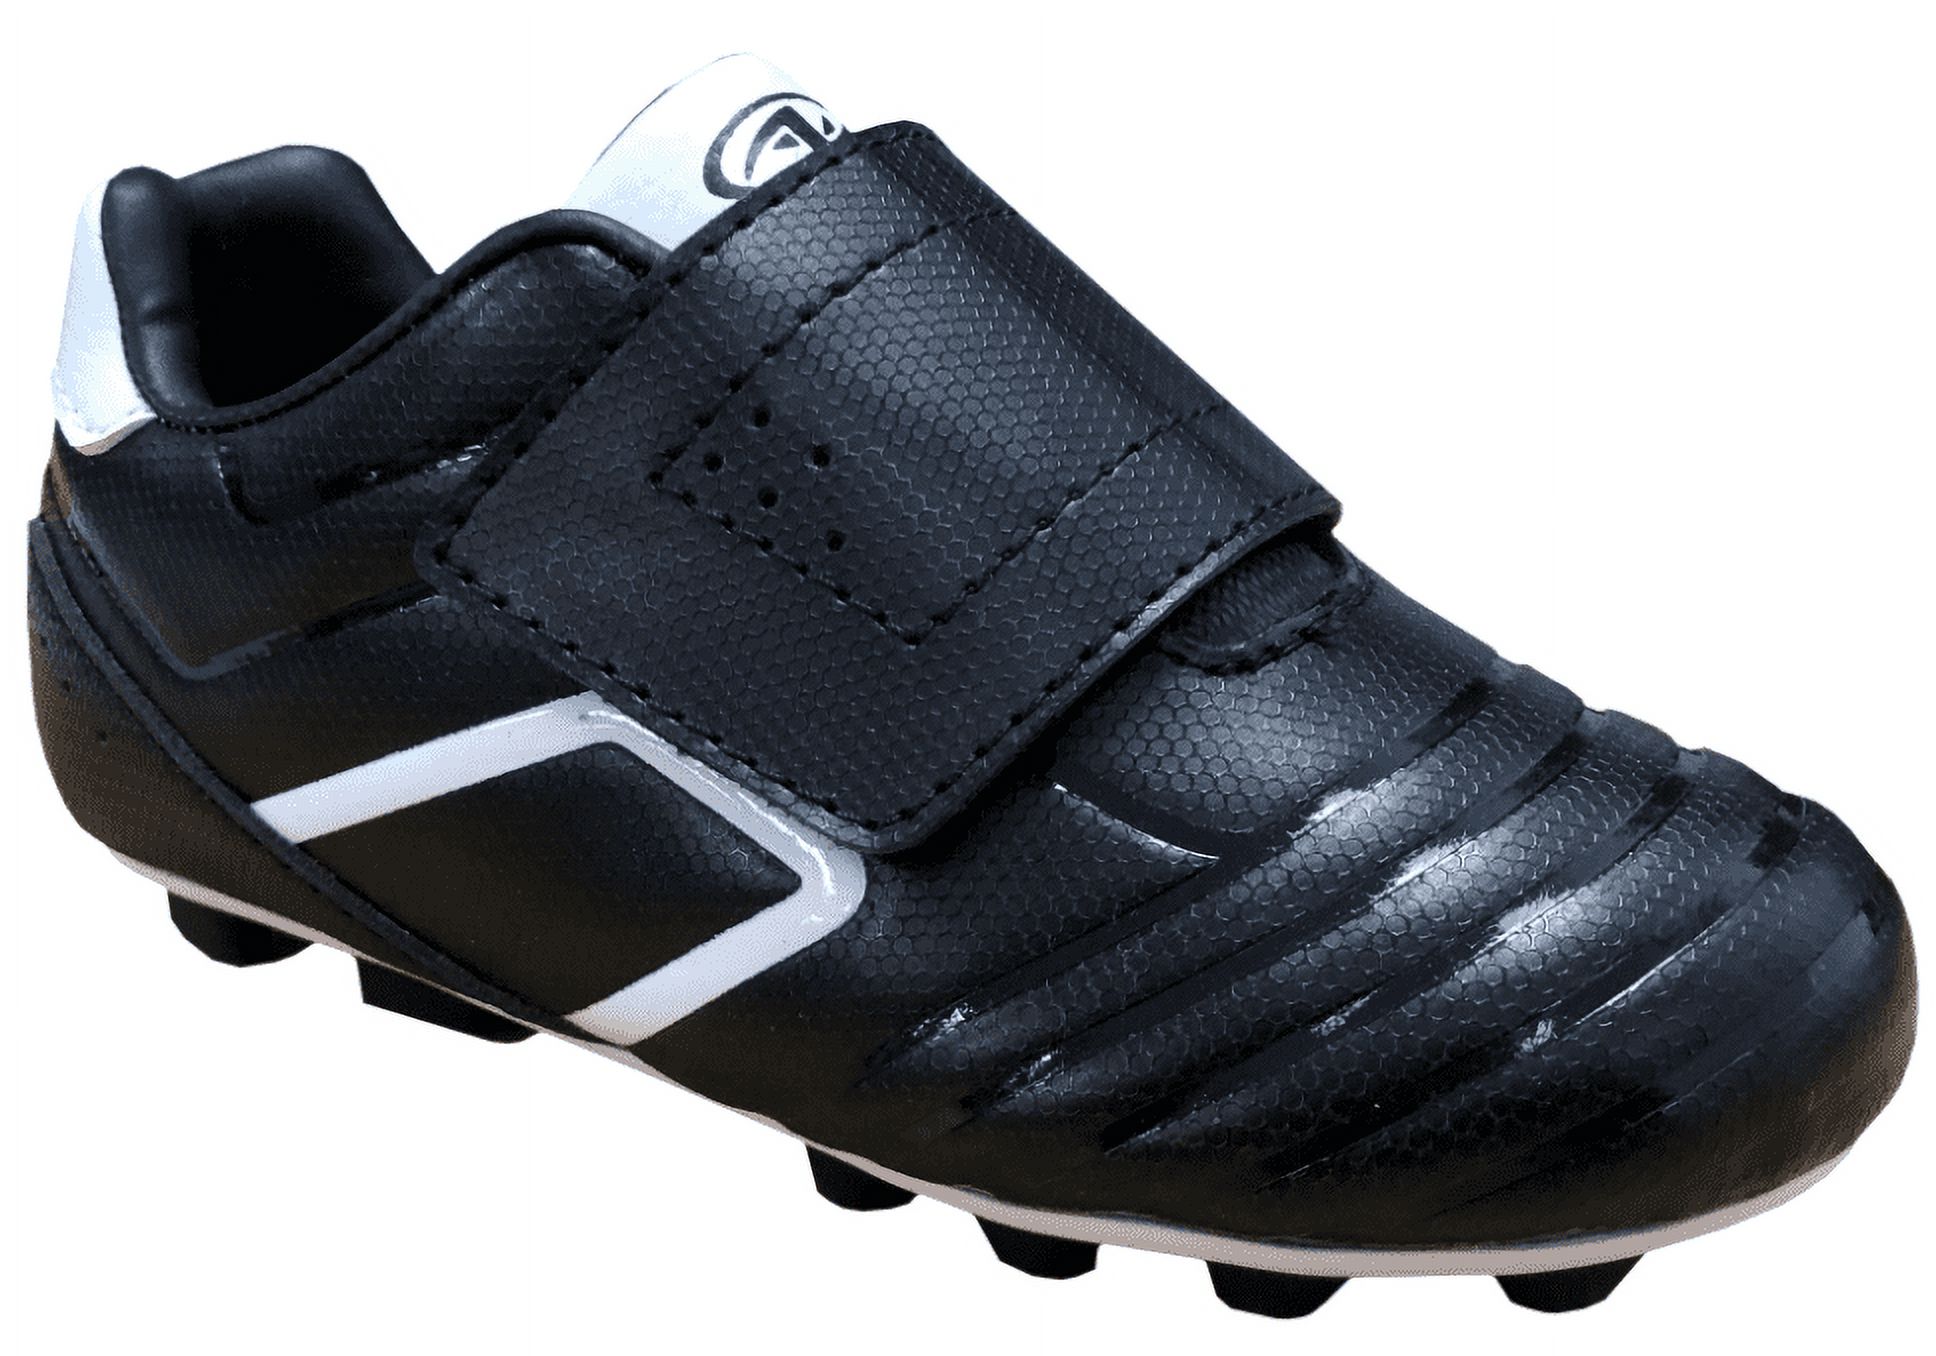 Athletic Works Youth Soccer Cleat - image 1 of 5